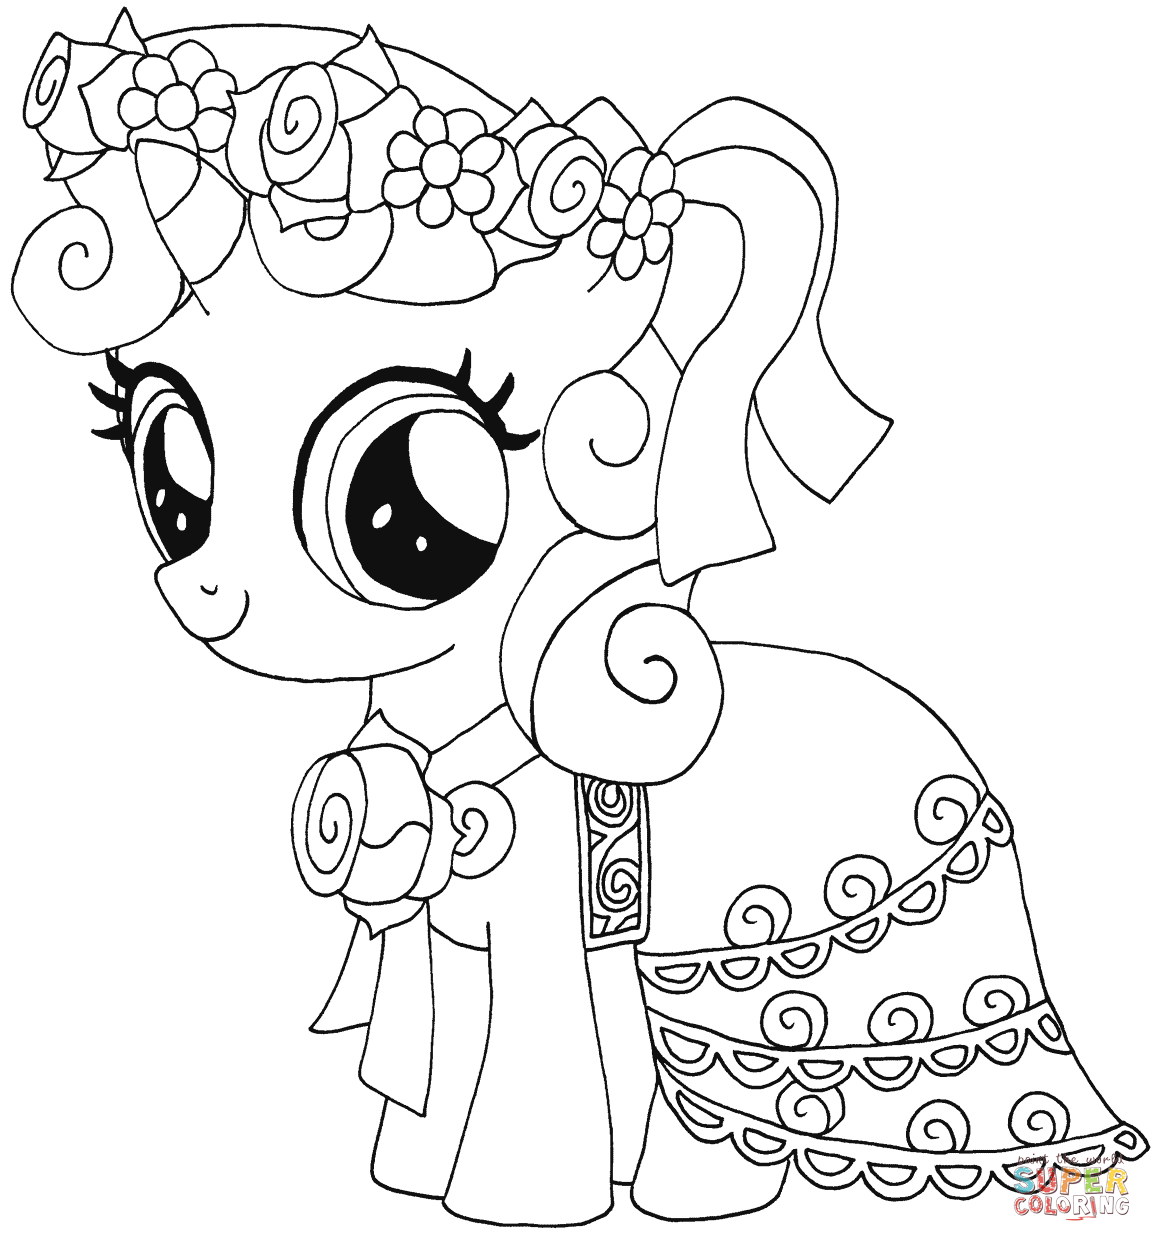 My Little Pony Sweetie Belle coloring page | Free Printable ...